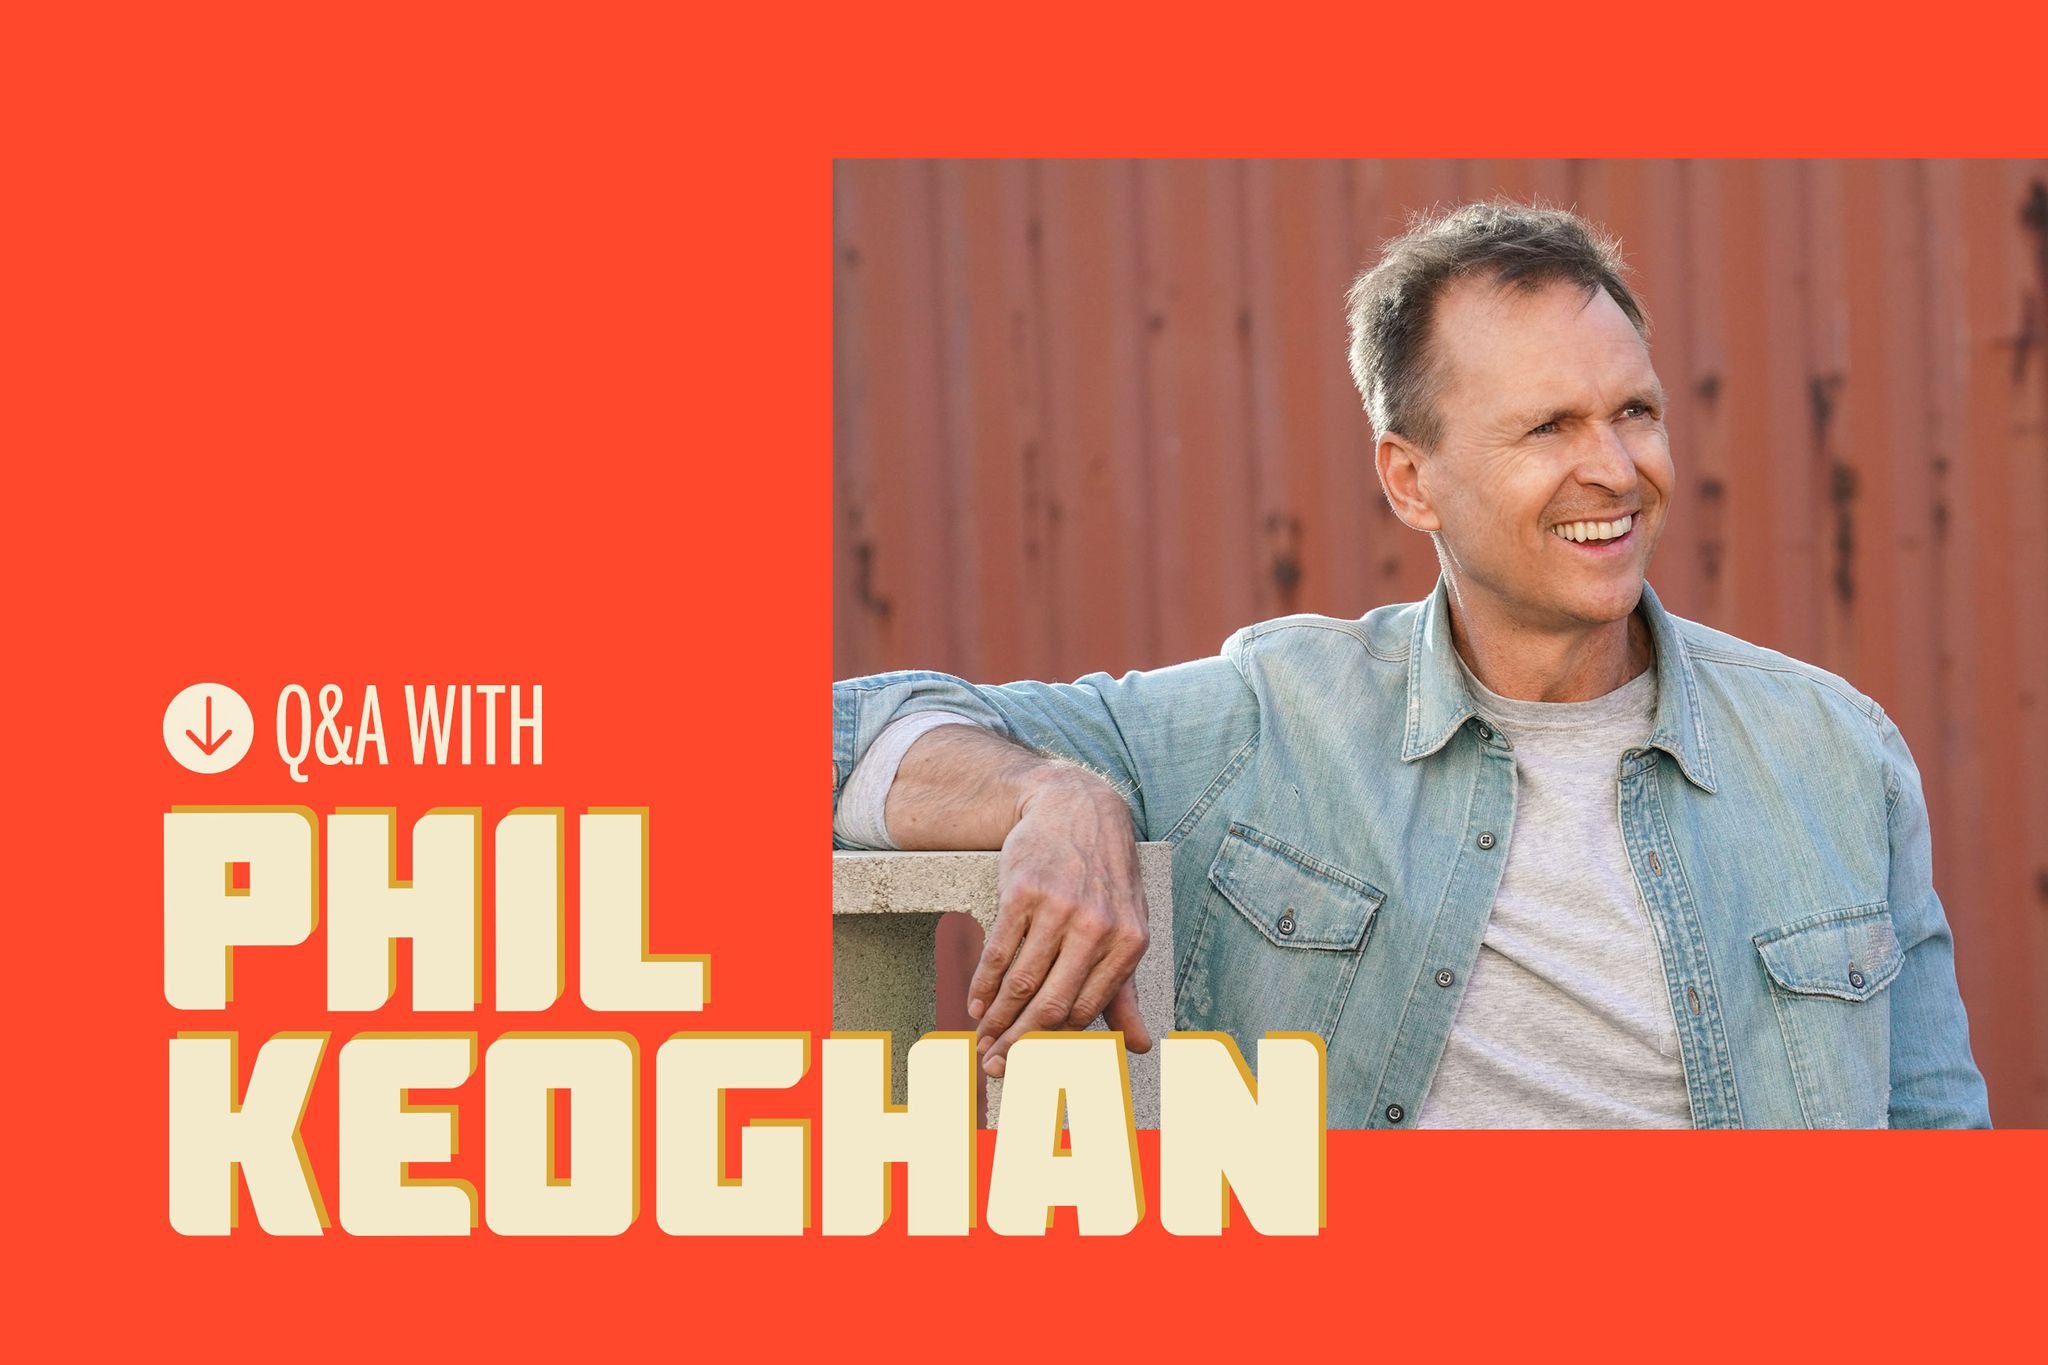 The future according to ‘Amazing Race’ host Phil Keoghan